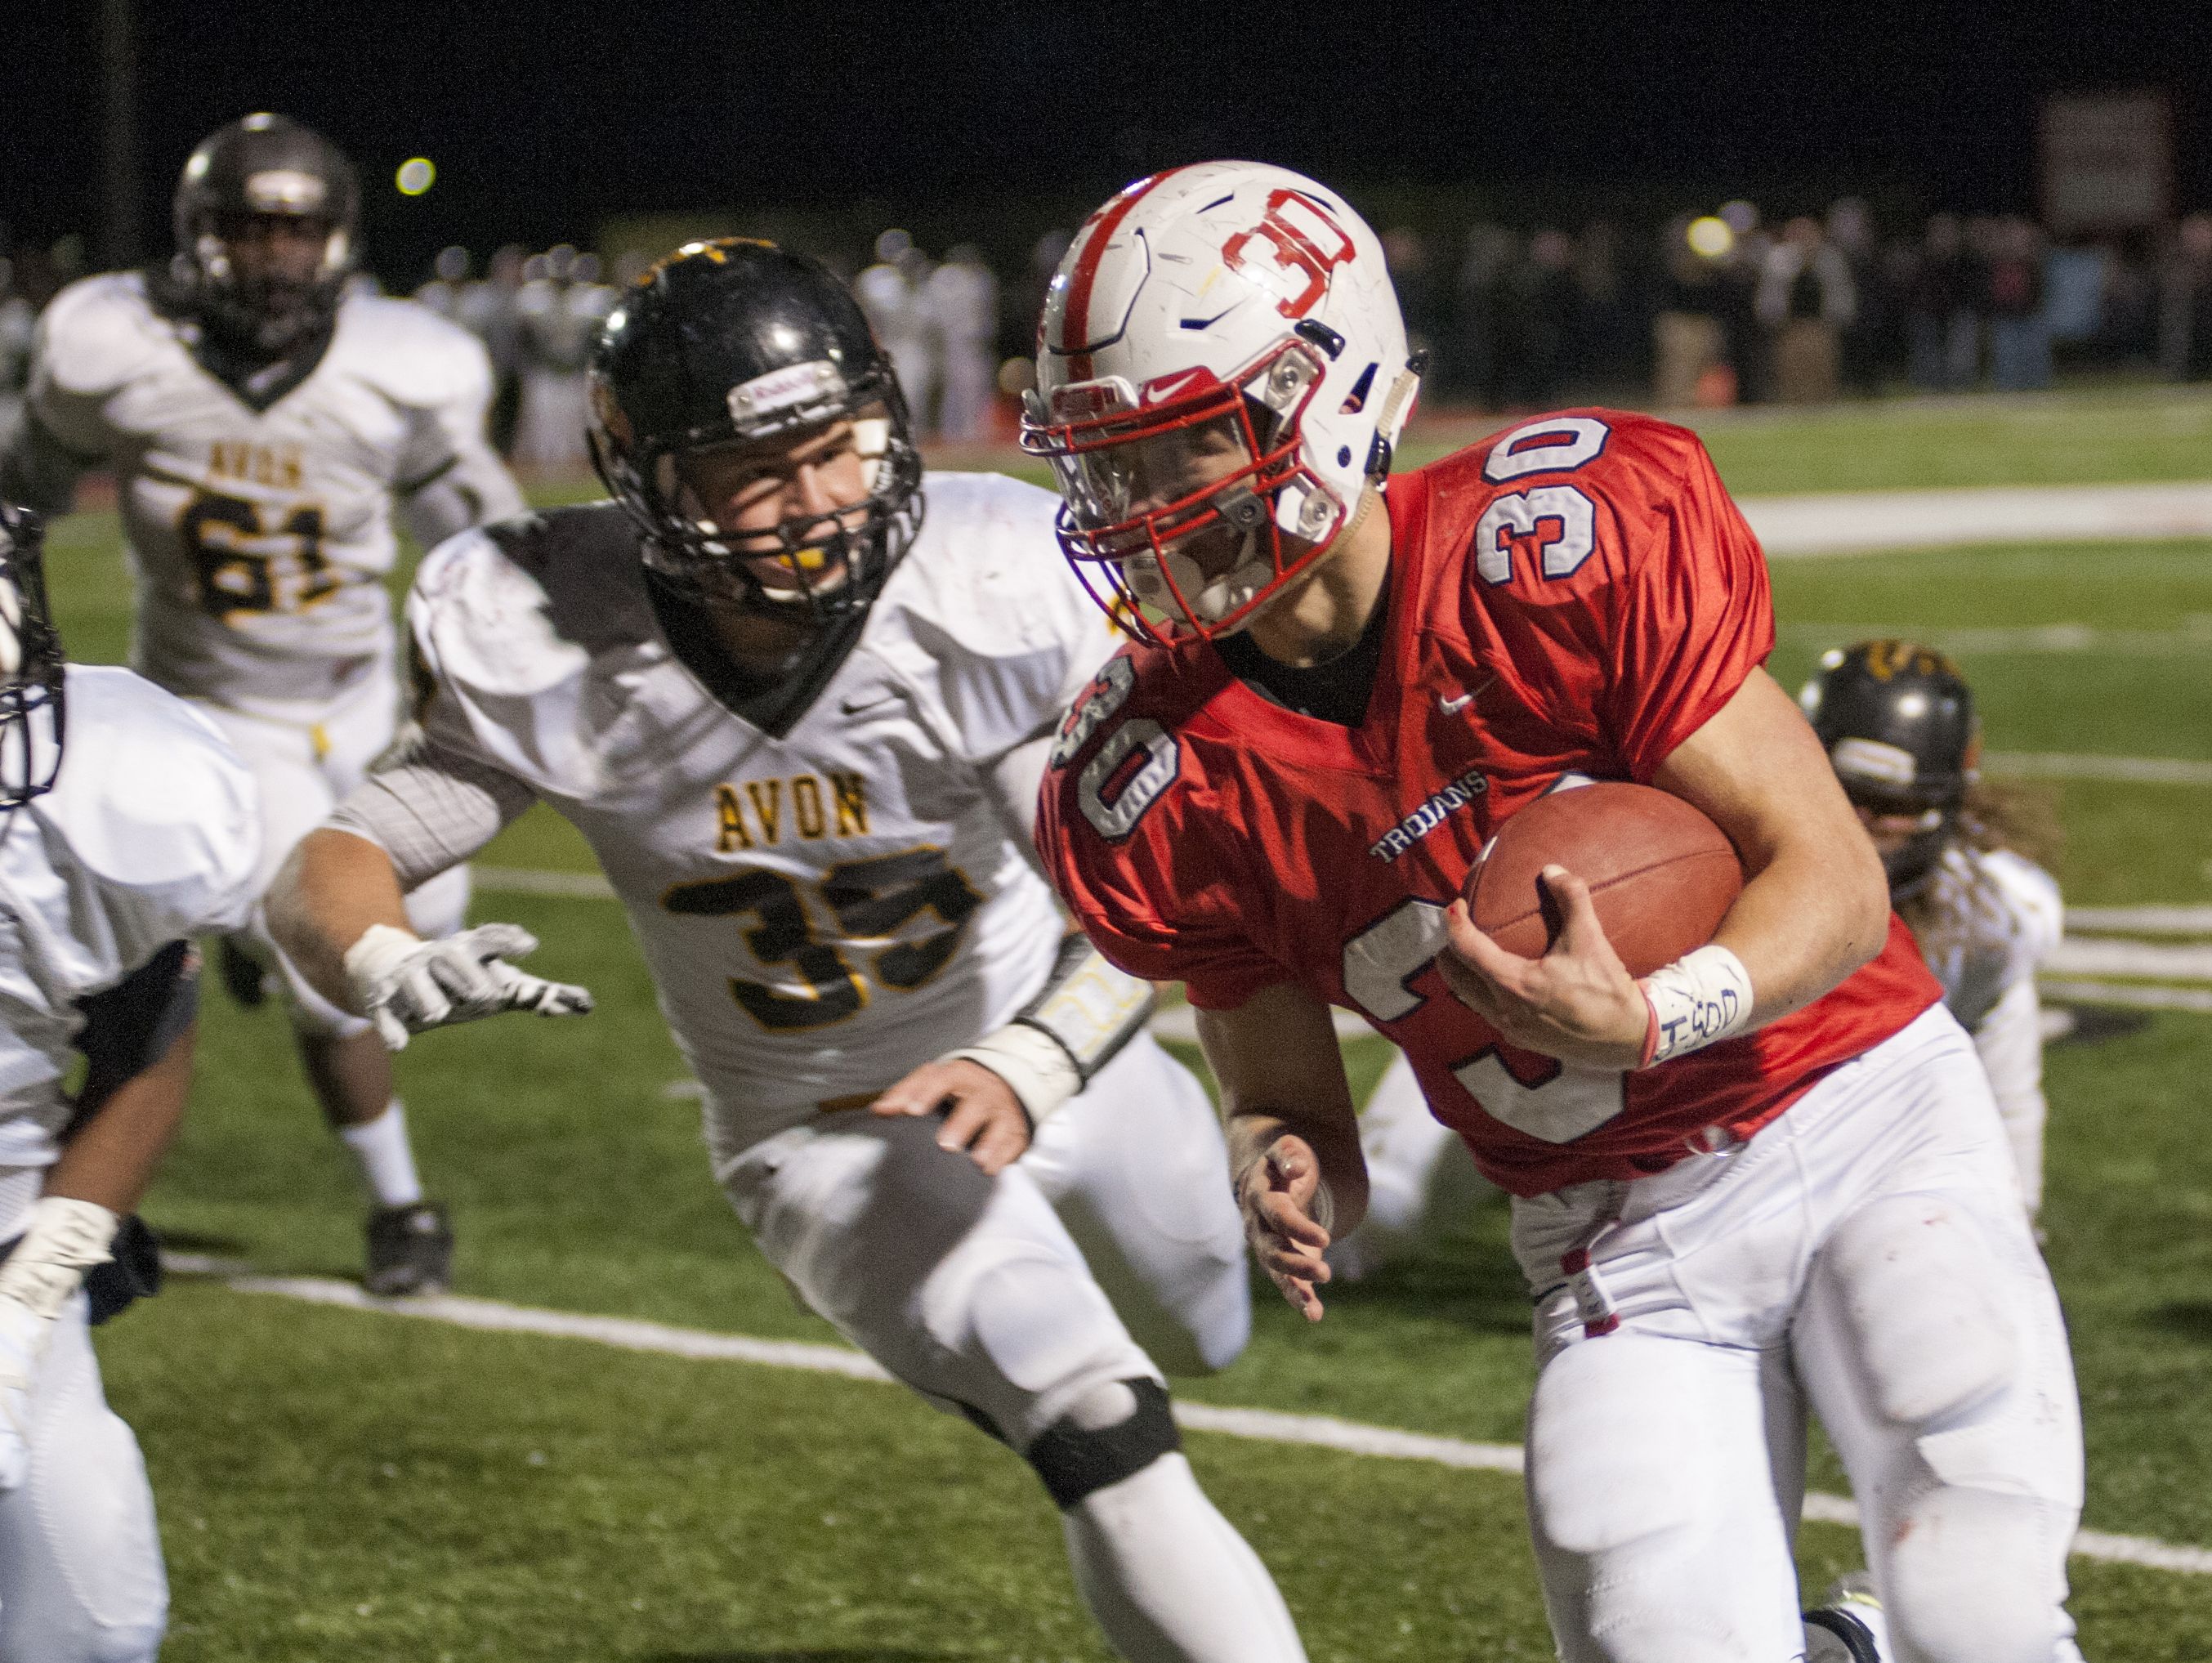 Center Grove's Titus McCoy (30) runs past Avon defense Friday, Nov. 13, 2015, during the Class 6A semi-state playoff game.